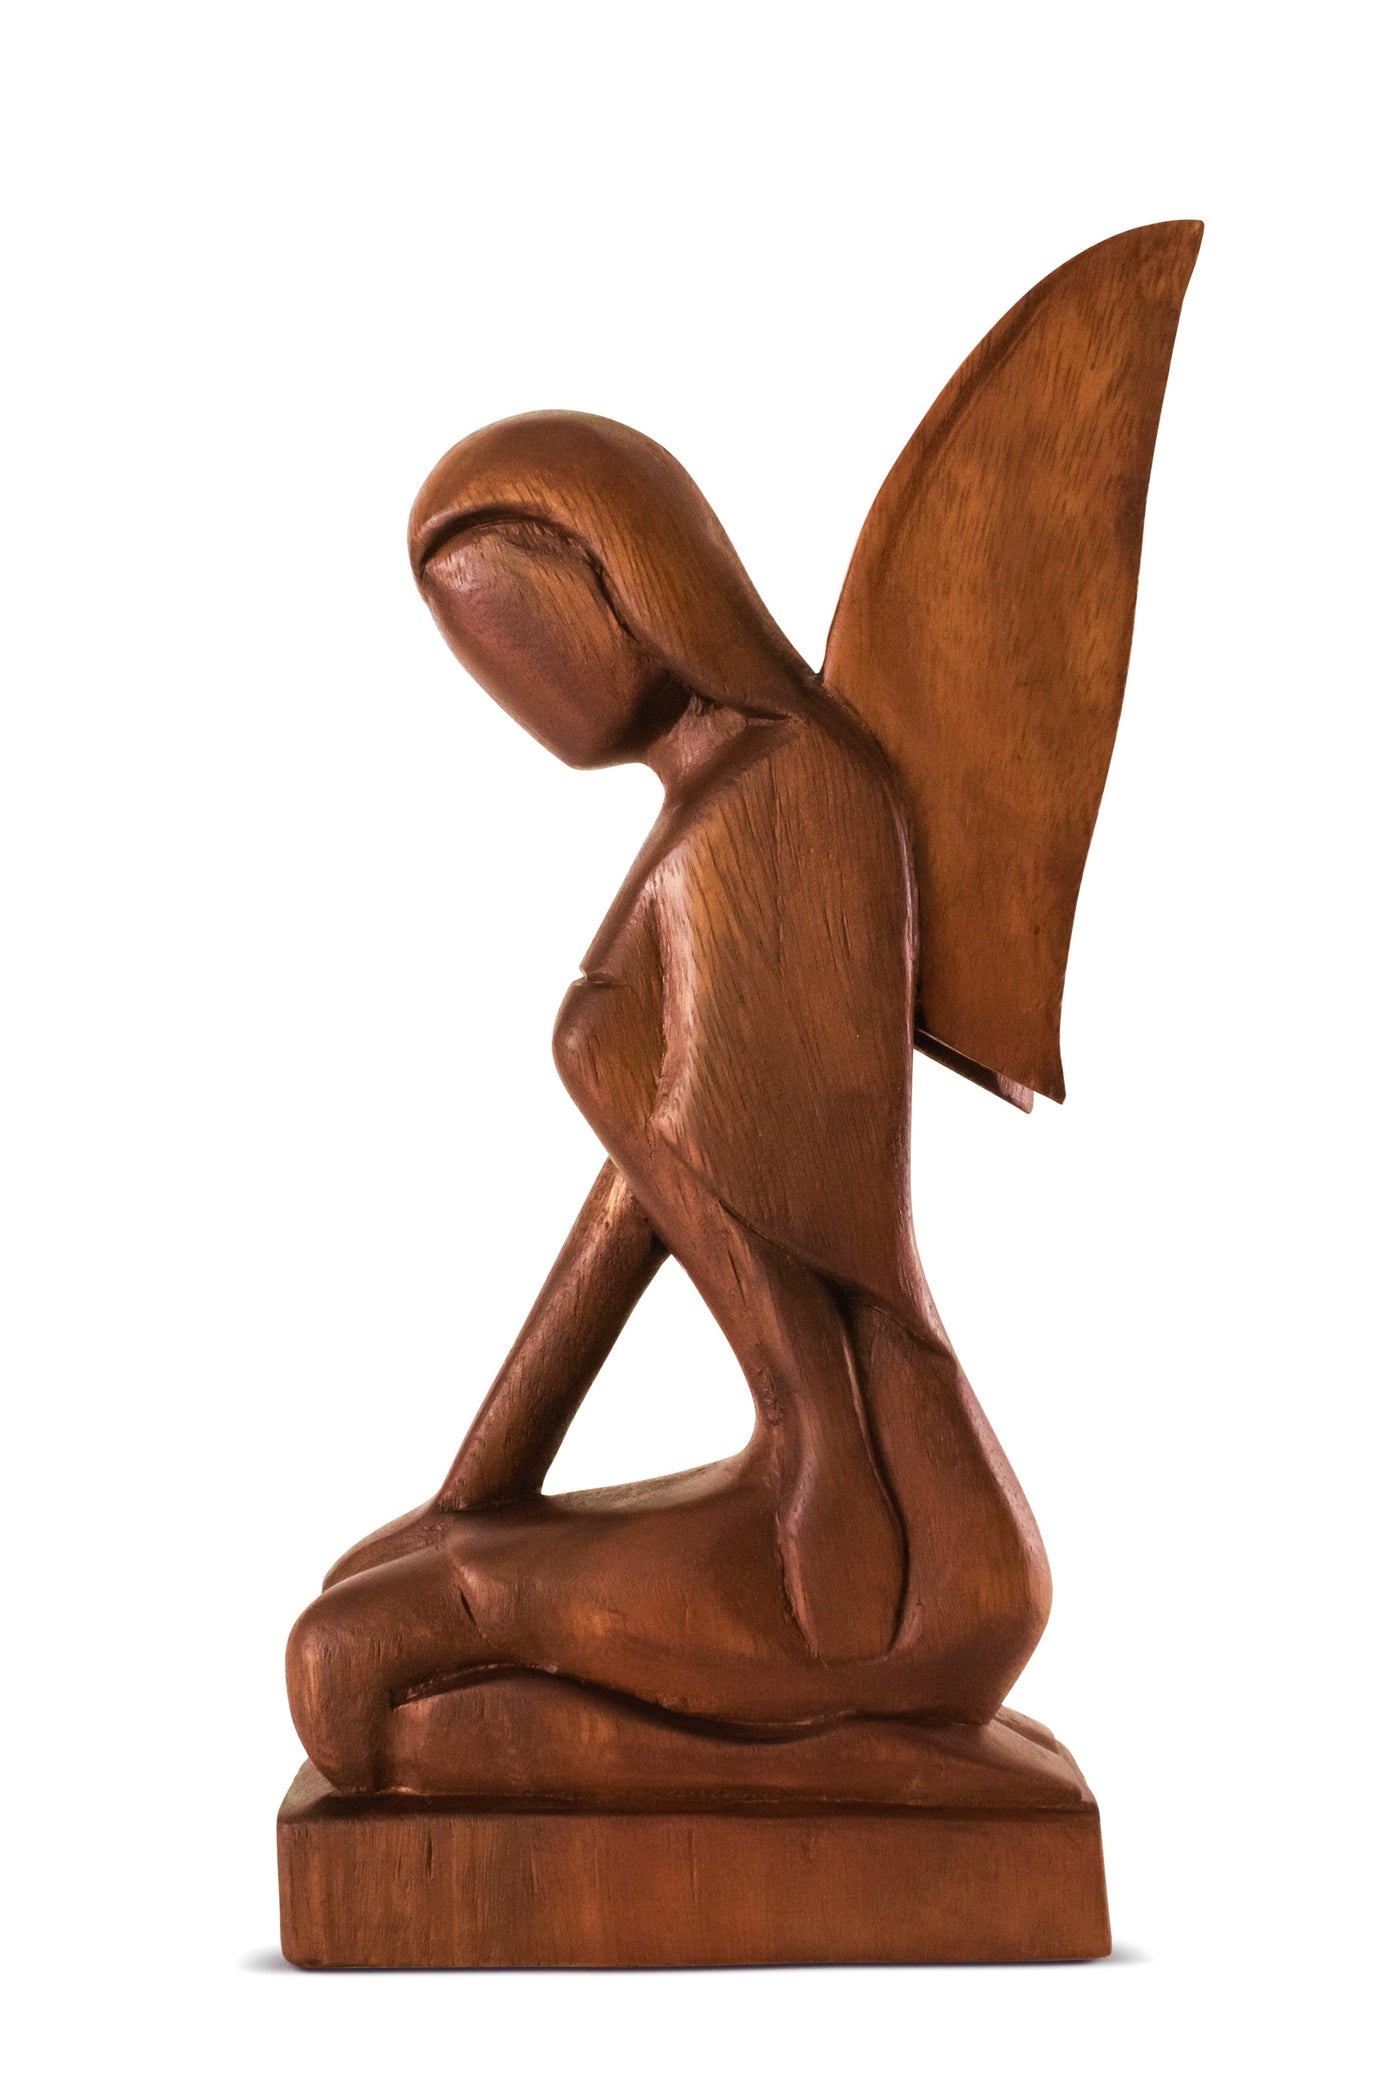 12" Wooden Handmade Abstract Sculpture Statue Handcrafted "Kneeling Angel" Gift Decorative Home Decor Figurine Accent Decoration Artwork Hand Carved